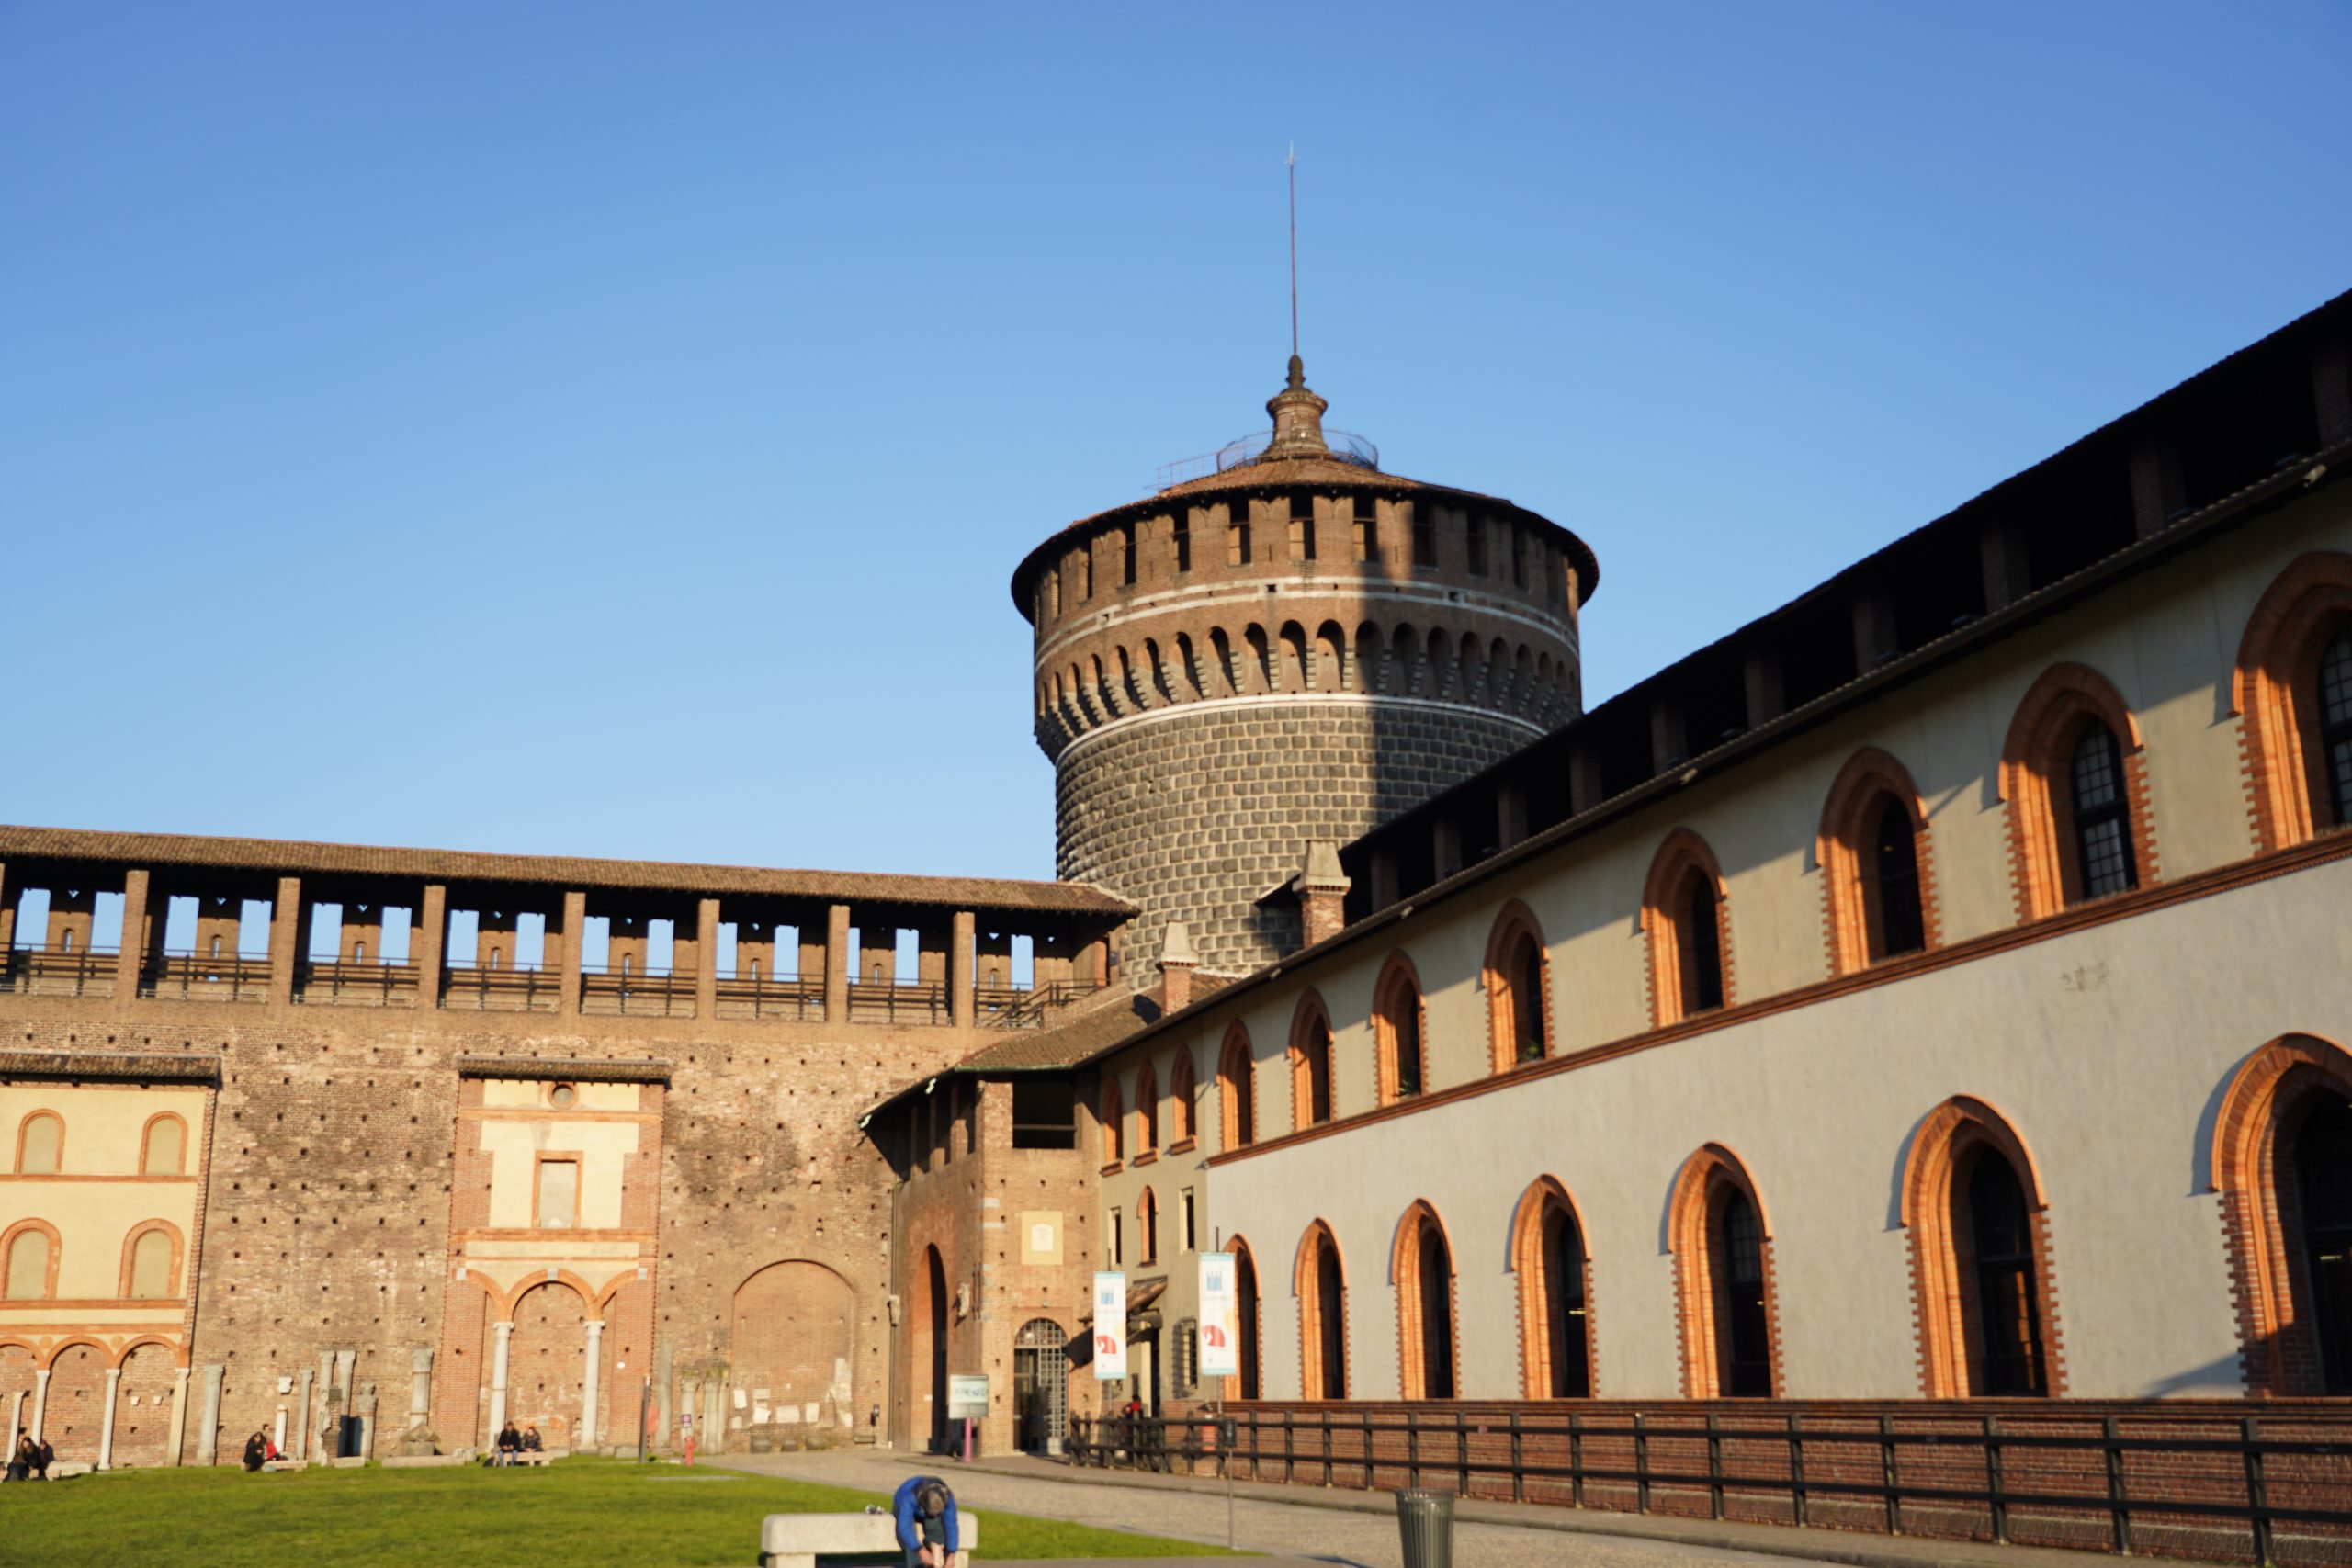 The Sforza Castle, or Castello Sforzesco in Italian, is a historic fortress built in the 15th century by Francesco Sforza, Duke of Milan. It served as a residence for the ruling families of Milan for several centuries.